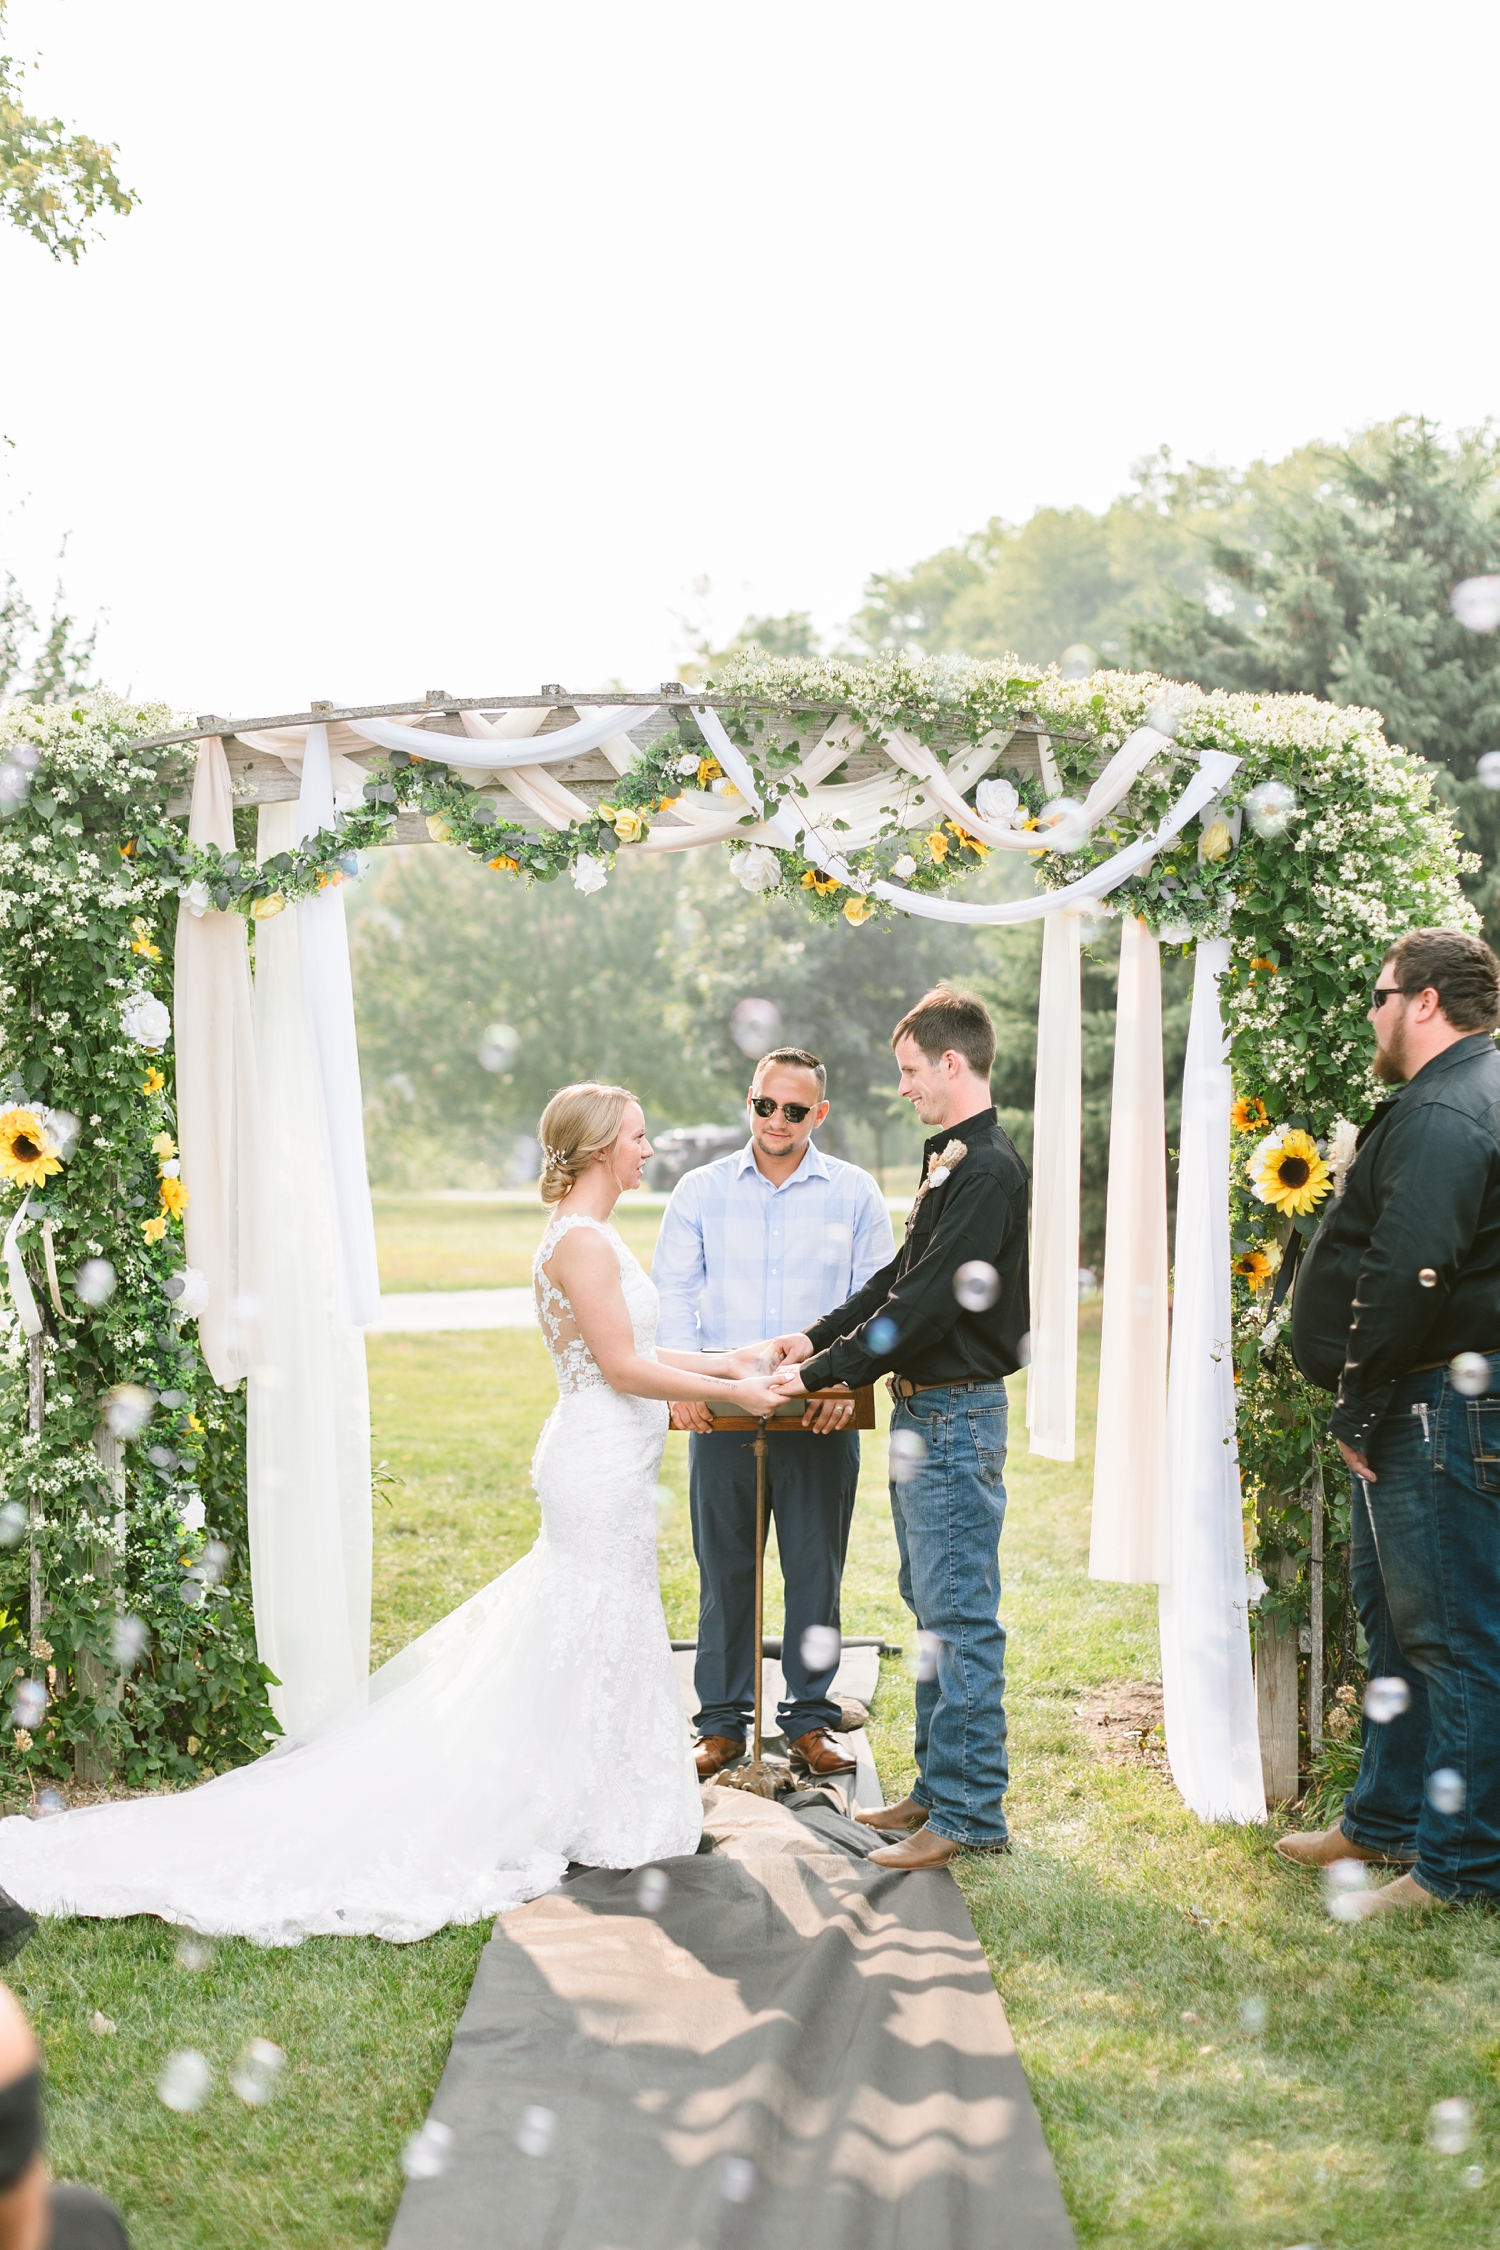 Mckennan and Zane say their wedding vows surrounded by bubbles beneath a floral gazebo arch with draping fabrics in the garden space at the Humboldt County Museum | CB Studio